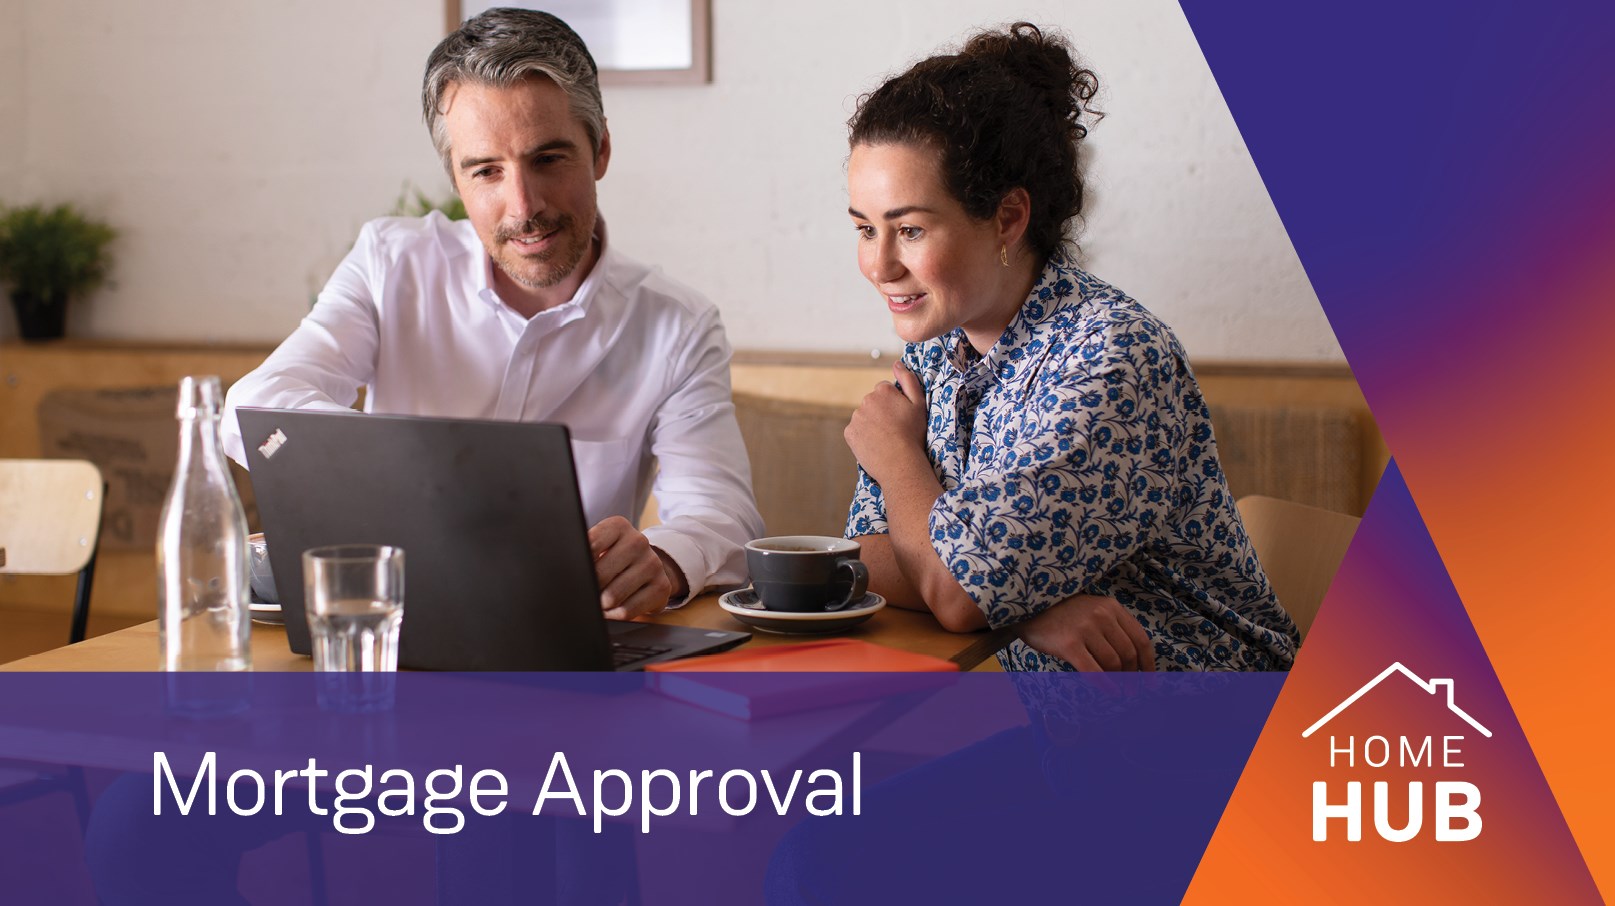 Couple sitting at a table looking at a computer , text over the image 'Mortgage Approval' and 'Home Hub' logo